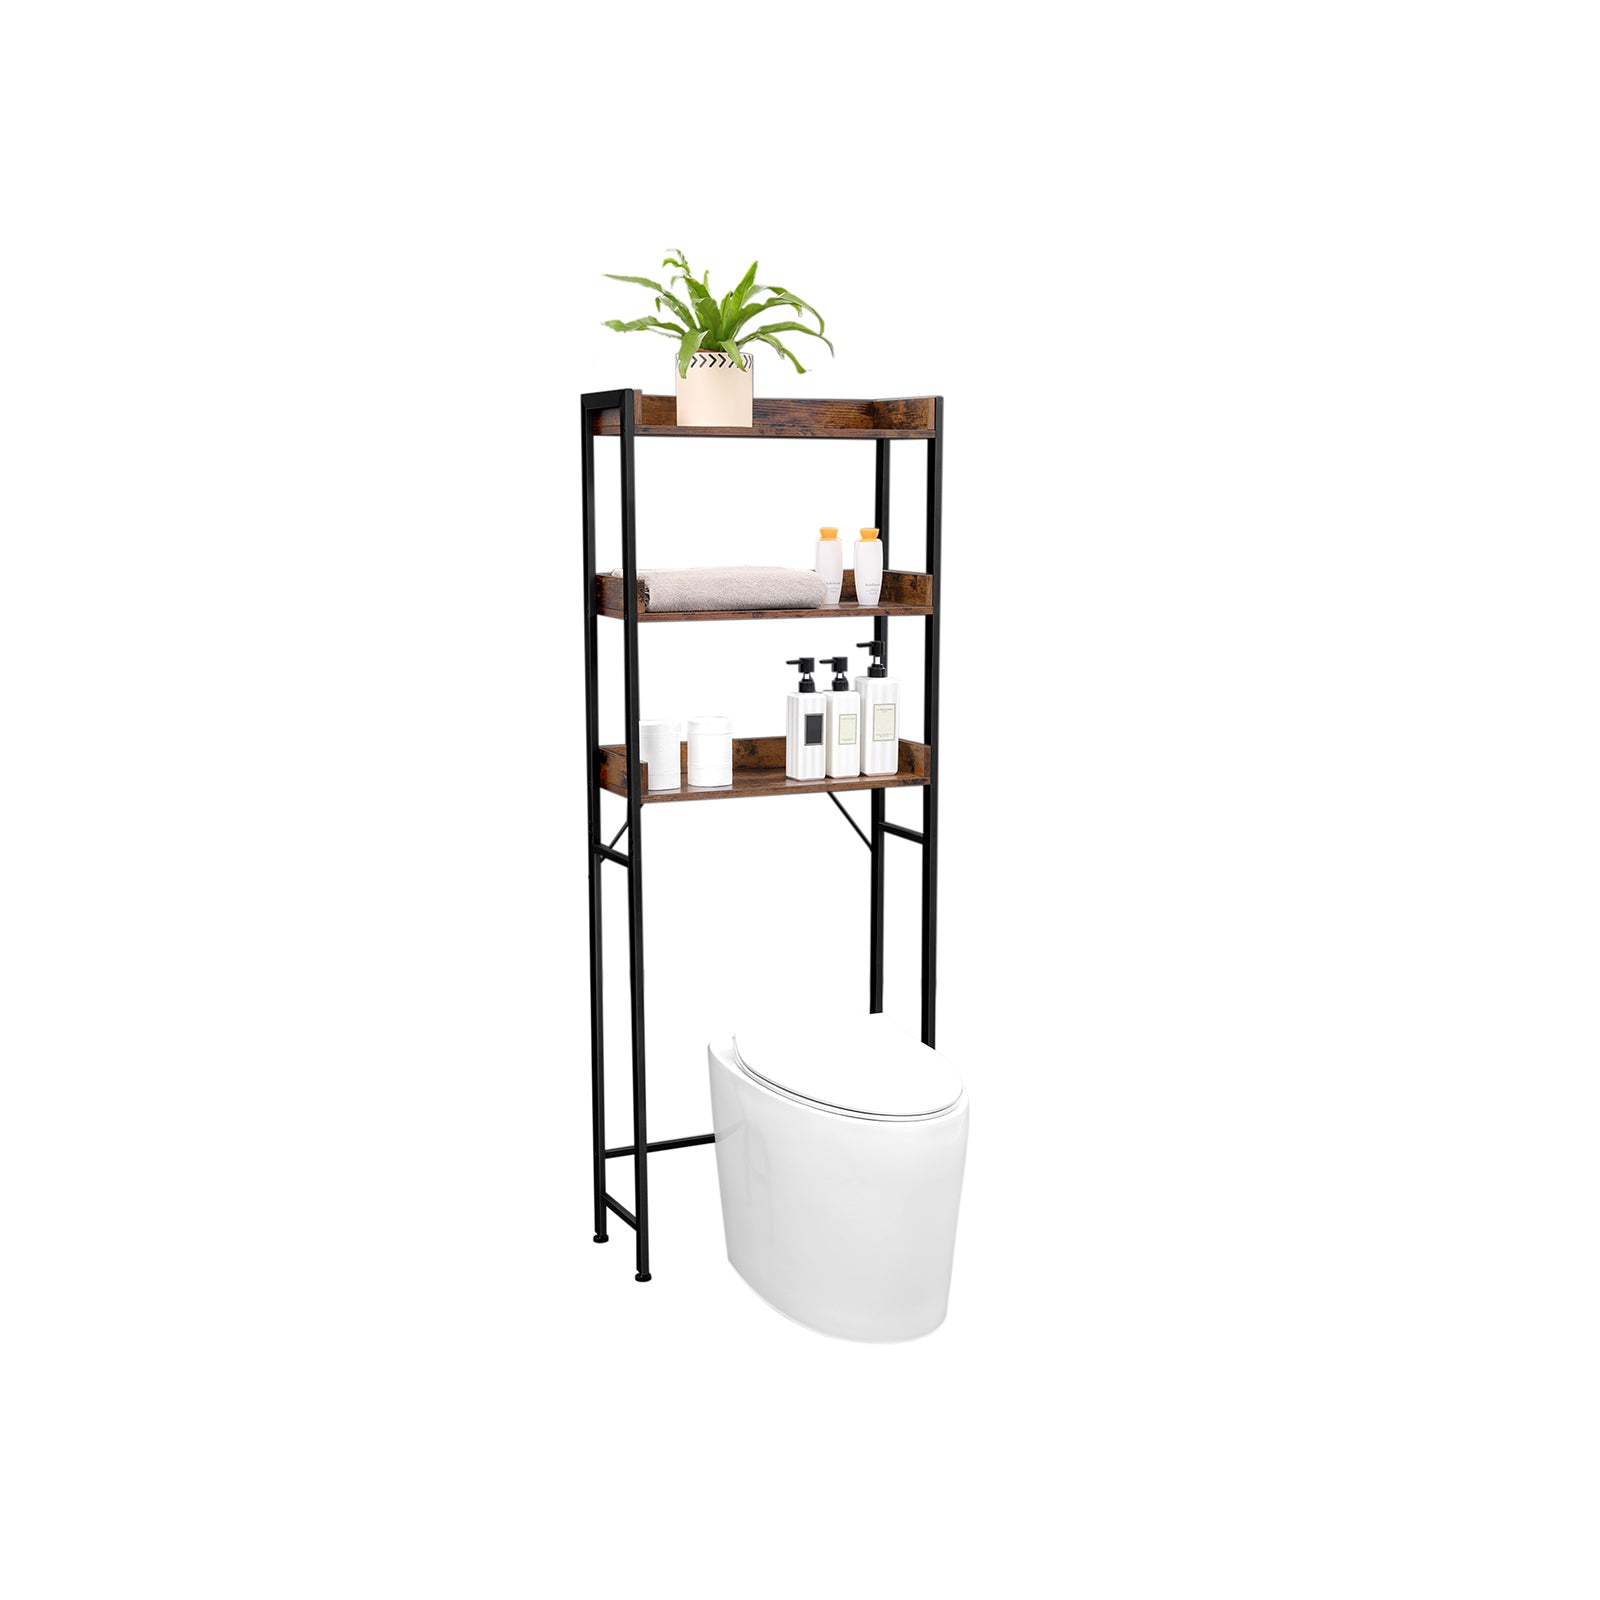 3-Tier Over-The-Toilet Rack, Space-Saving Bathroom Storage Shelf, Stable, Easy to Assemble, Washing Machine Storage Rack